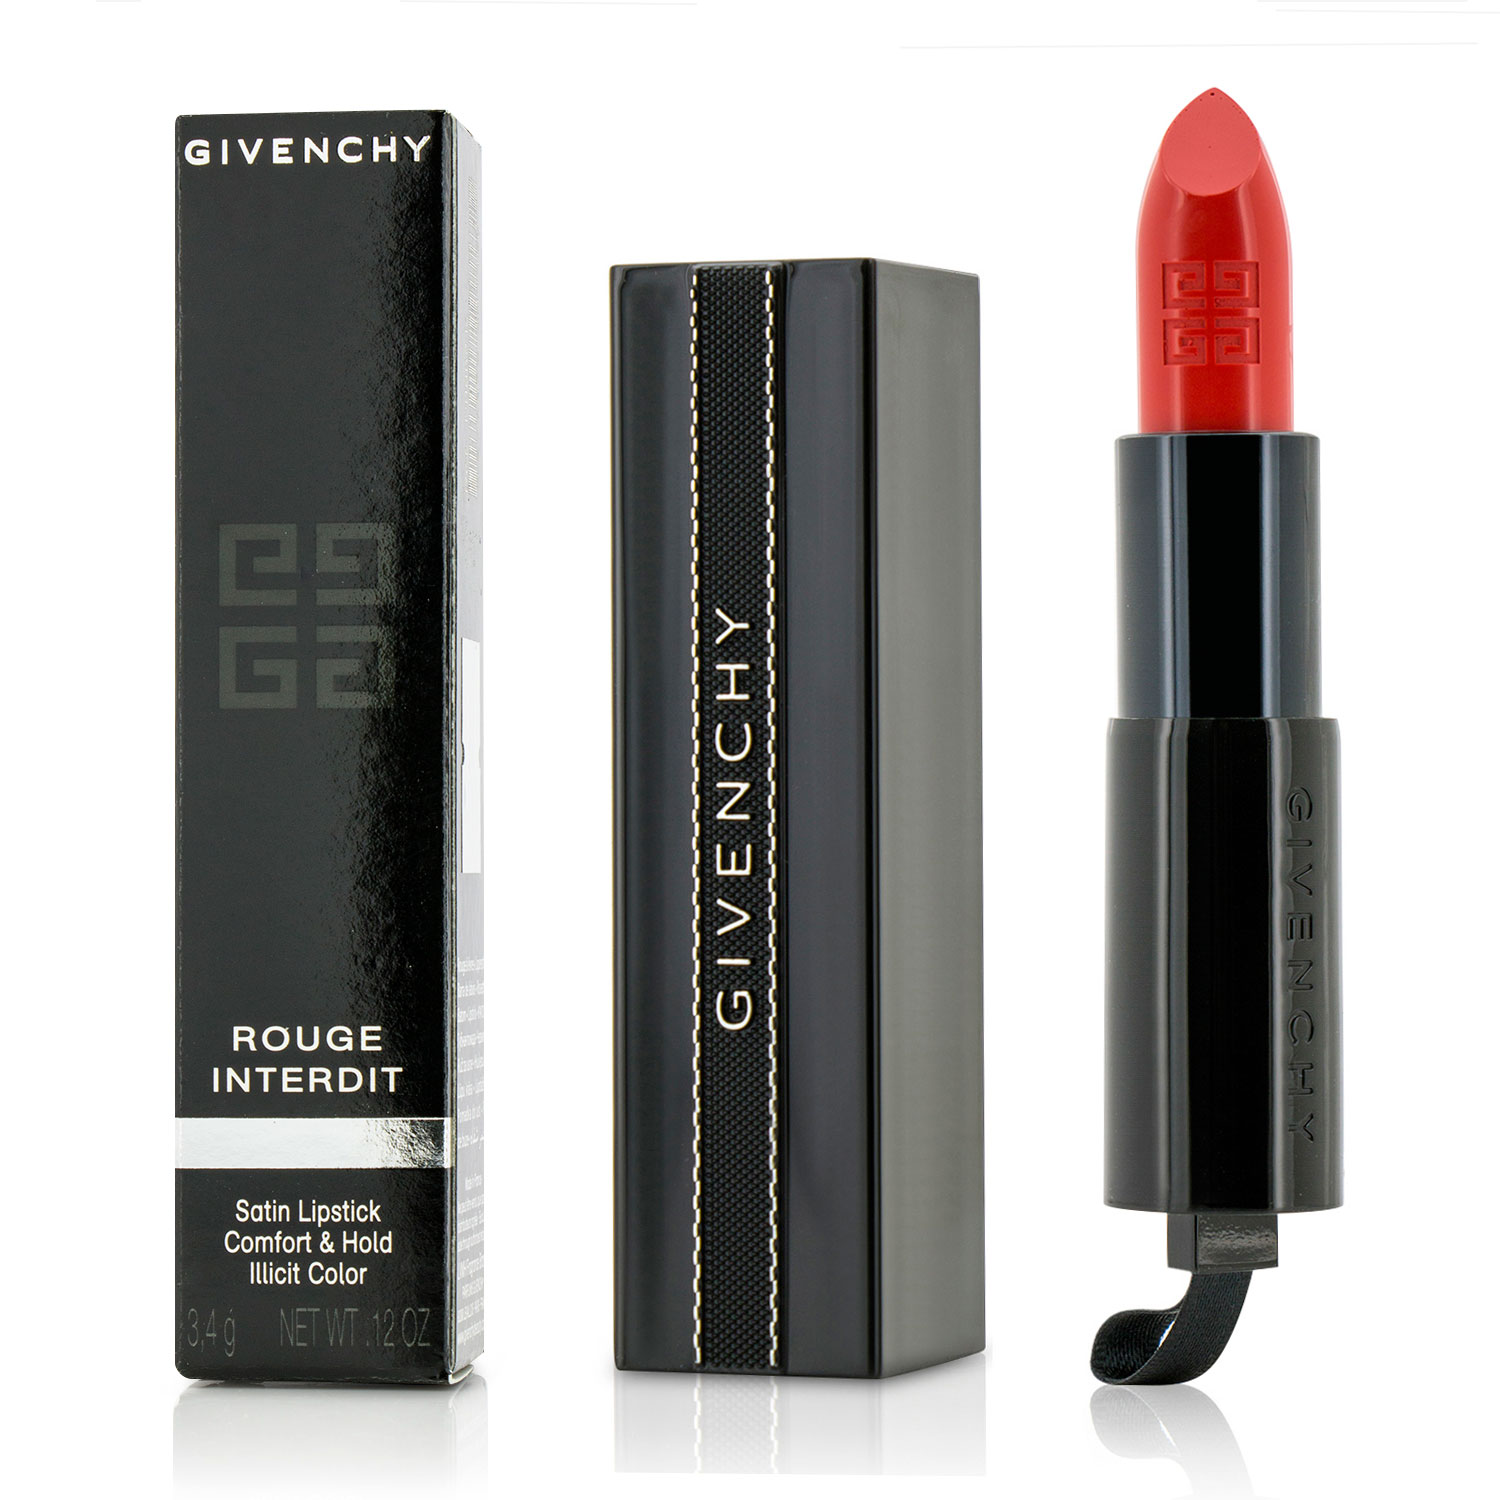 Rouge Interdit Satin Lipstick - # 16 Wanted Coral Givenchy Image